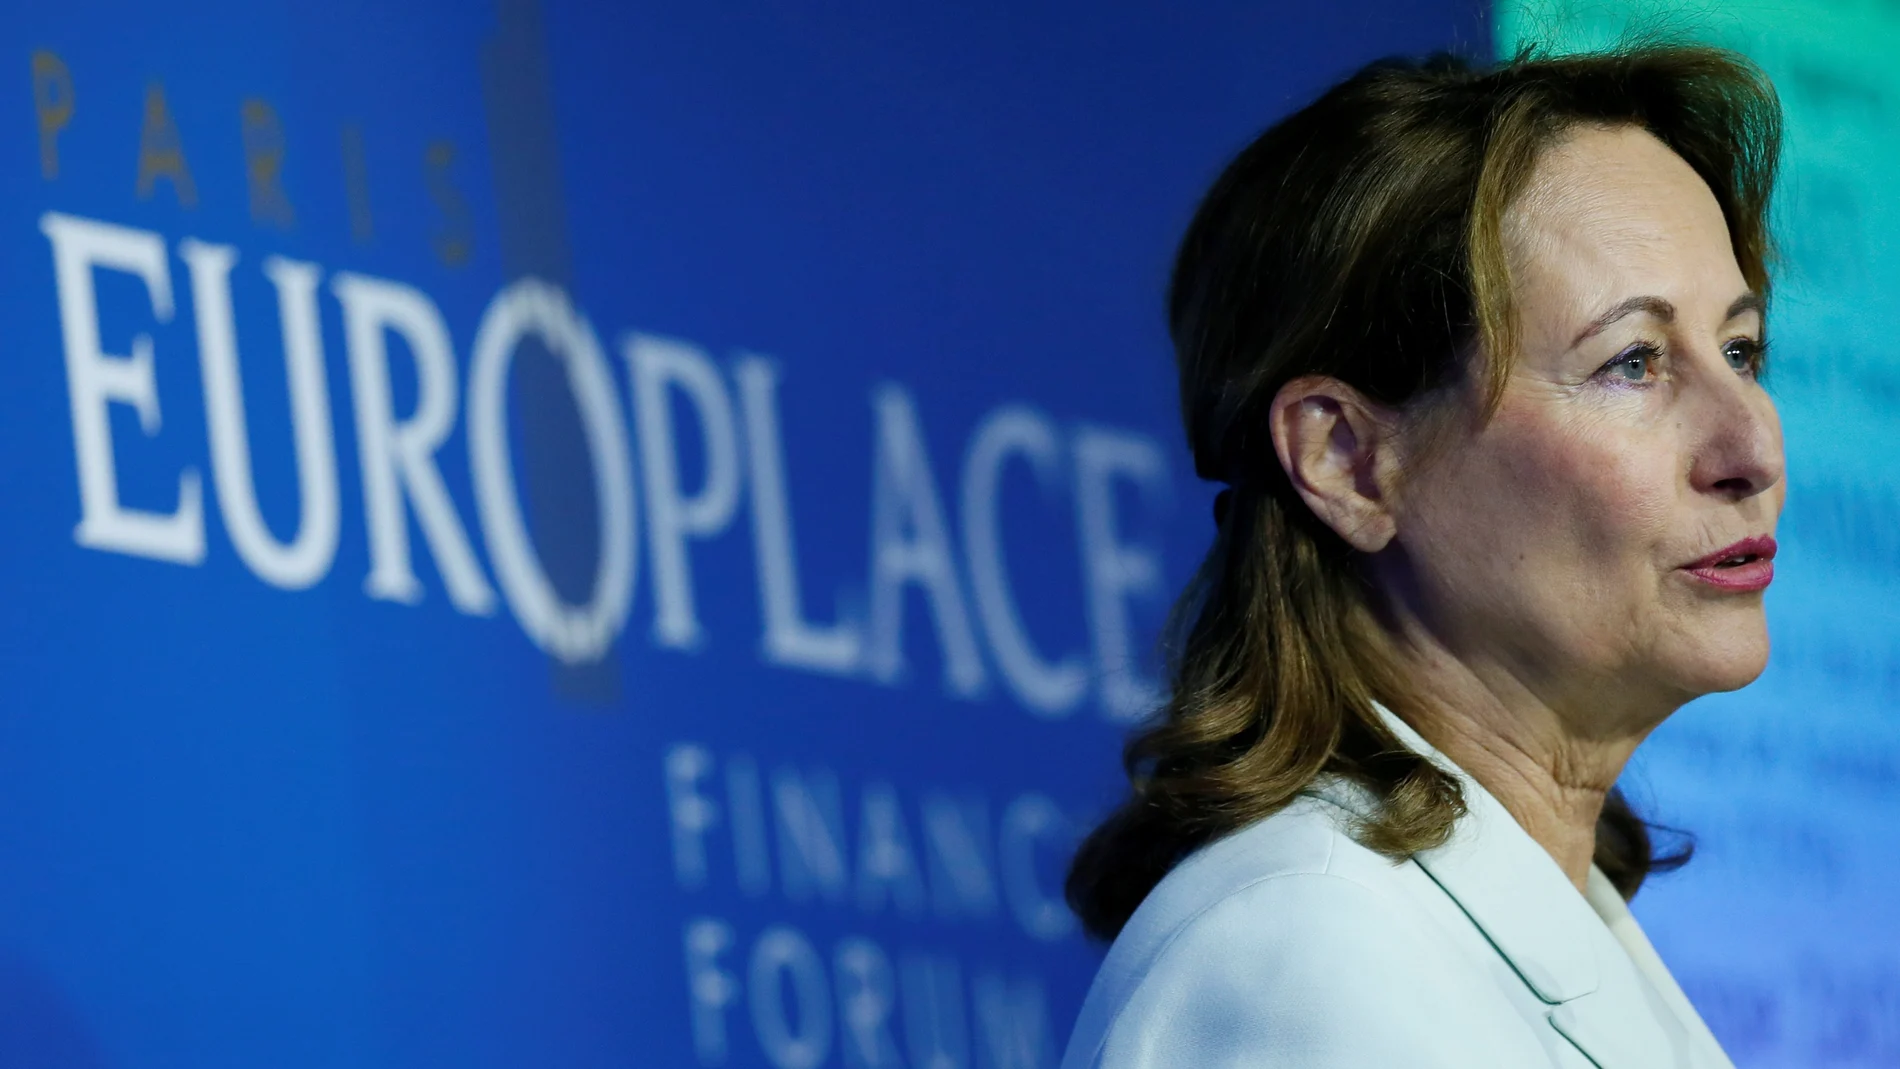 FILE PHOTO: Former French Ecology Minister Segolene Royal delivers a speech during the Paris Europlace International Financial Forum in Paris